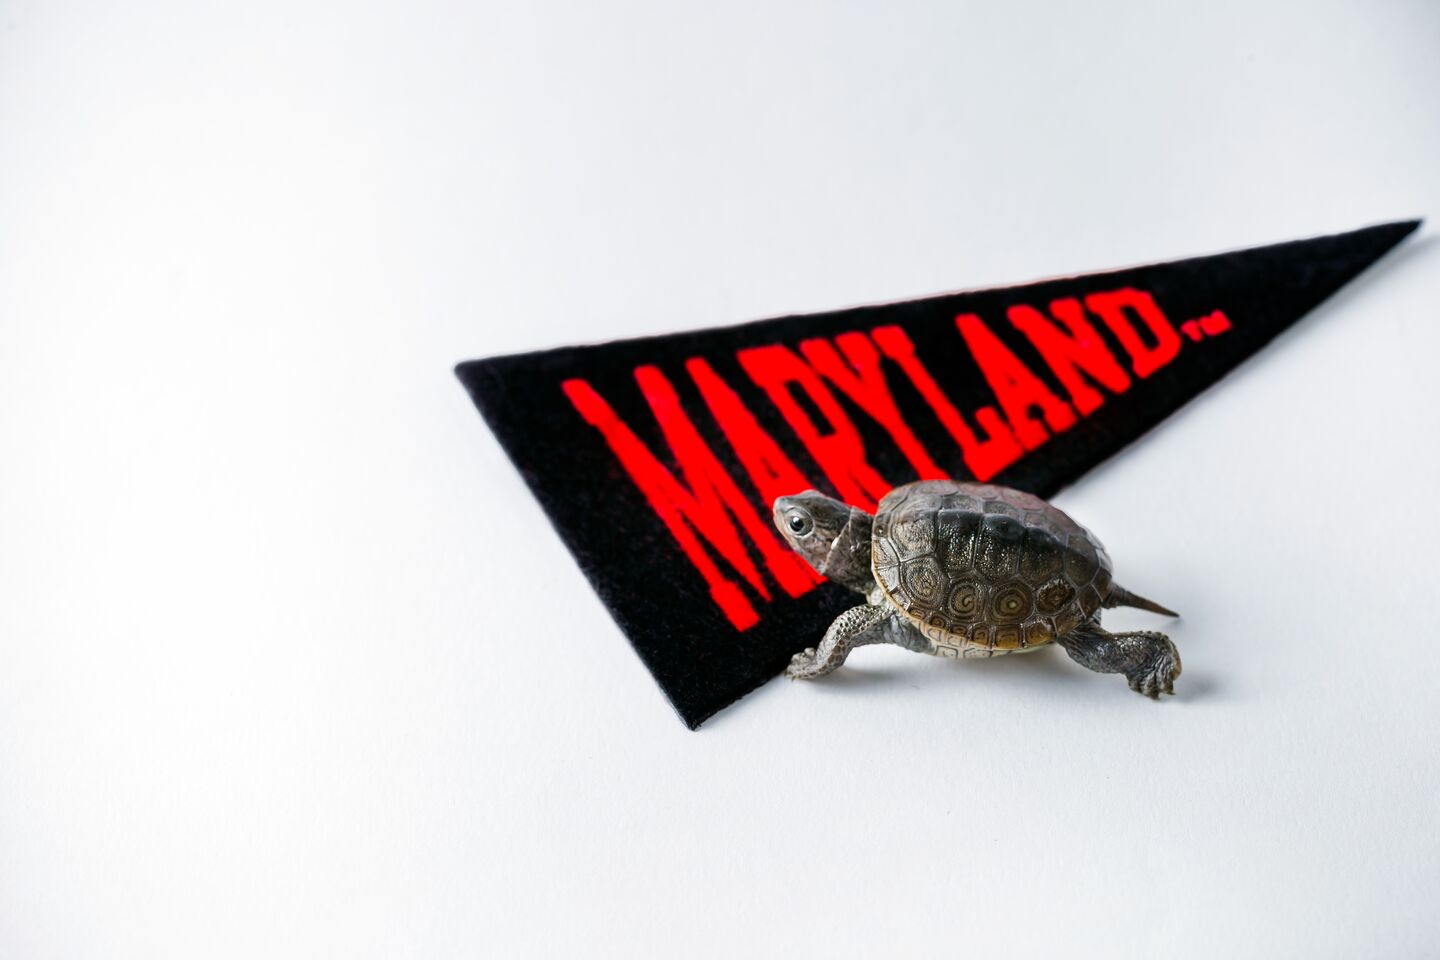 Baby Terrapin turtle walking across a Maryland pennant flag.